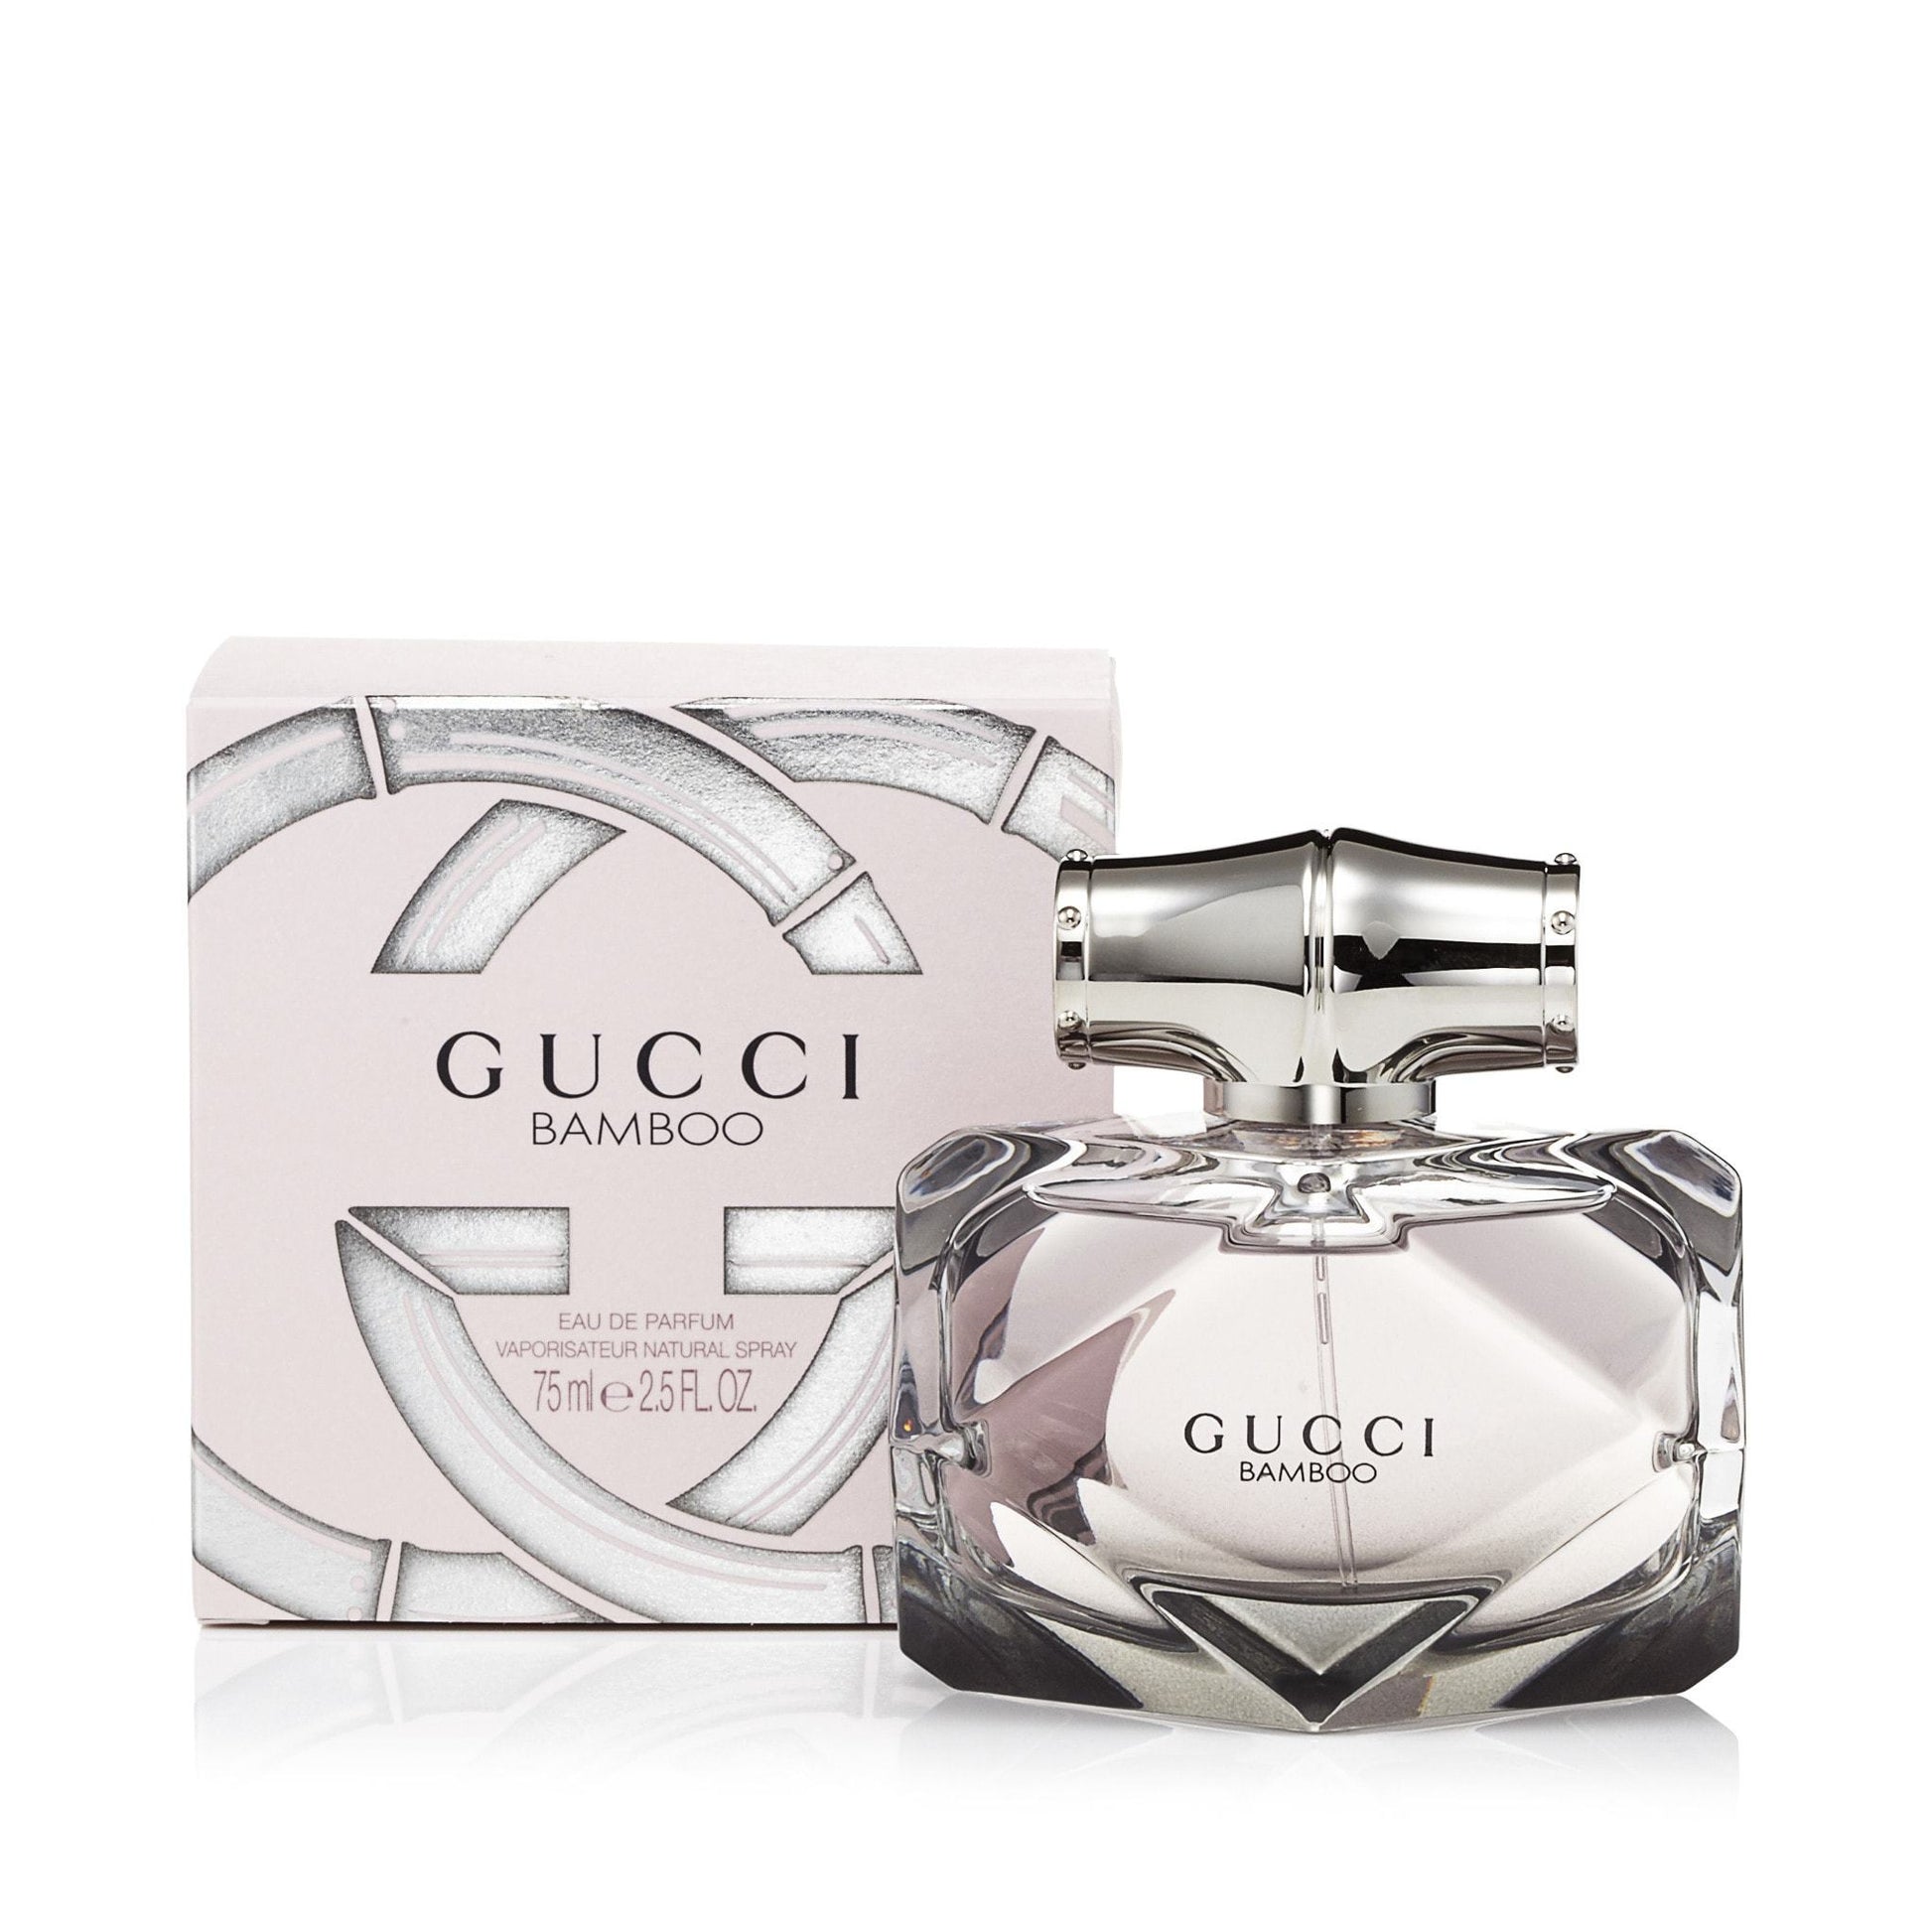 Bamboo Eau de Parfum Spray for Women by Gucci, Product image 1